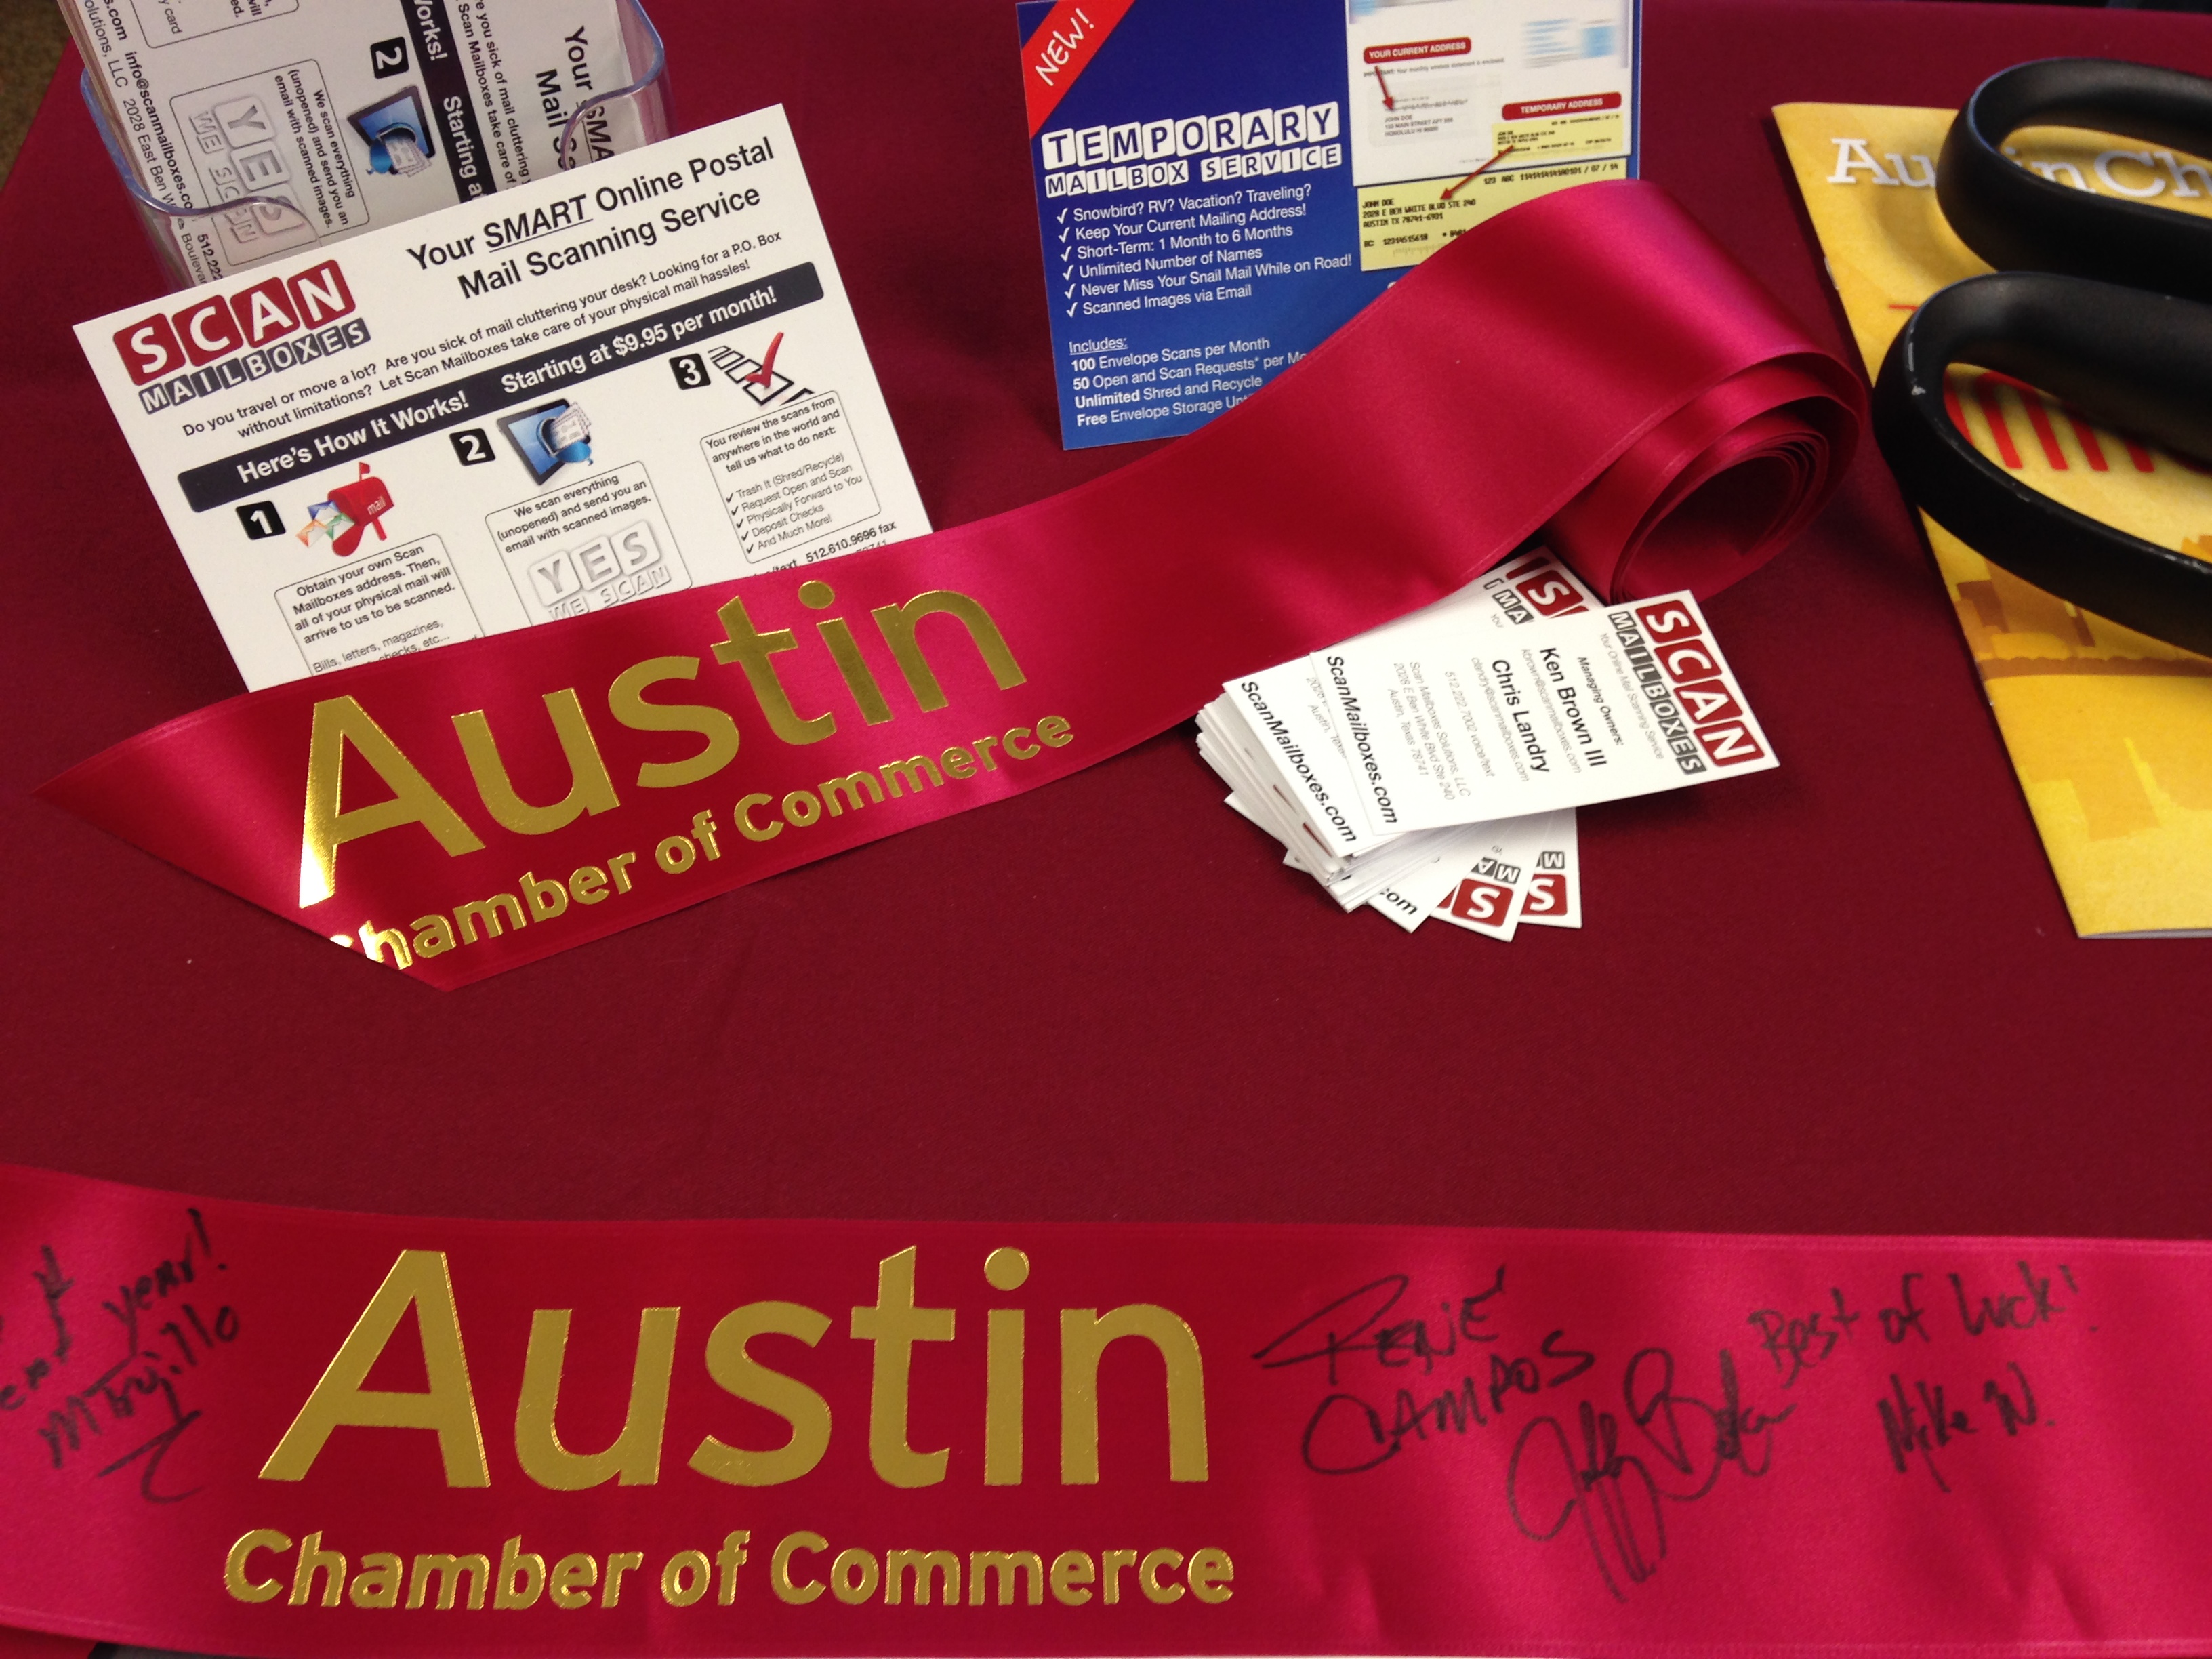 From the ribbon cut event with the Austin Chamber of Commerce